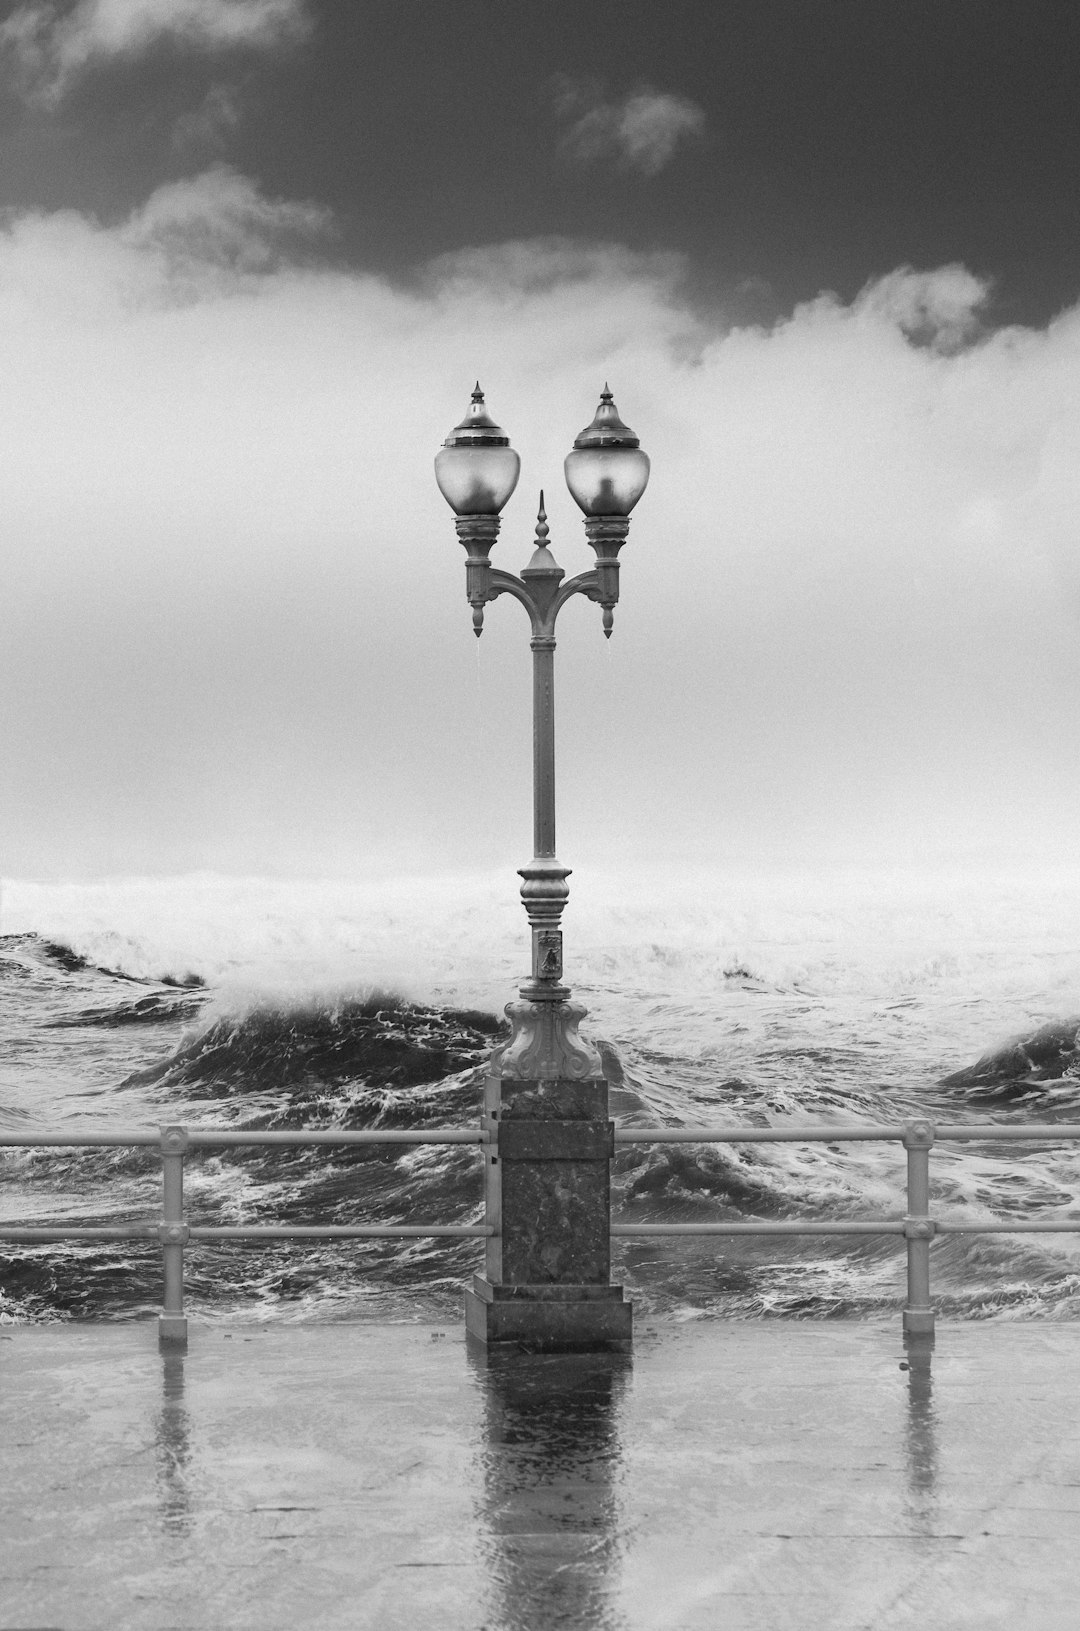 grayscale photography of outdoor lamp near sea